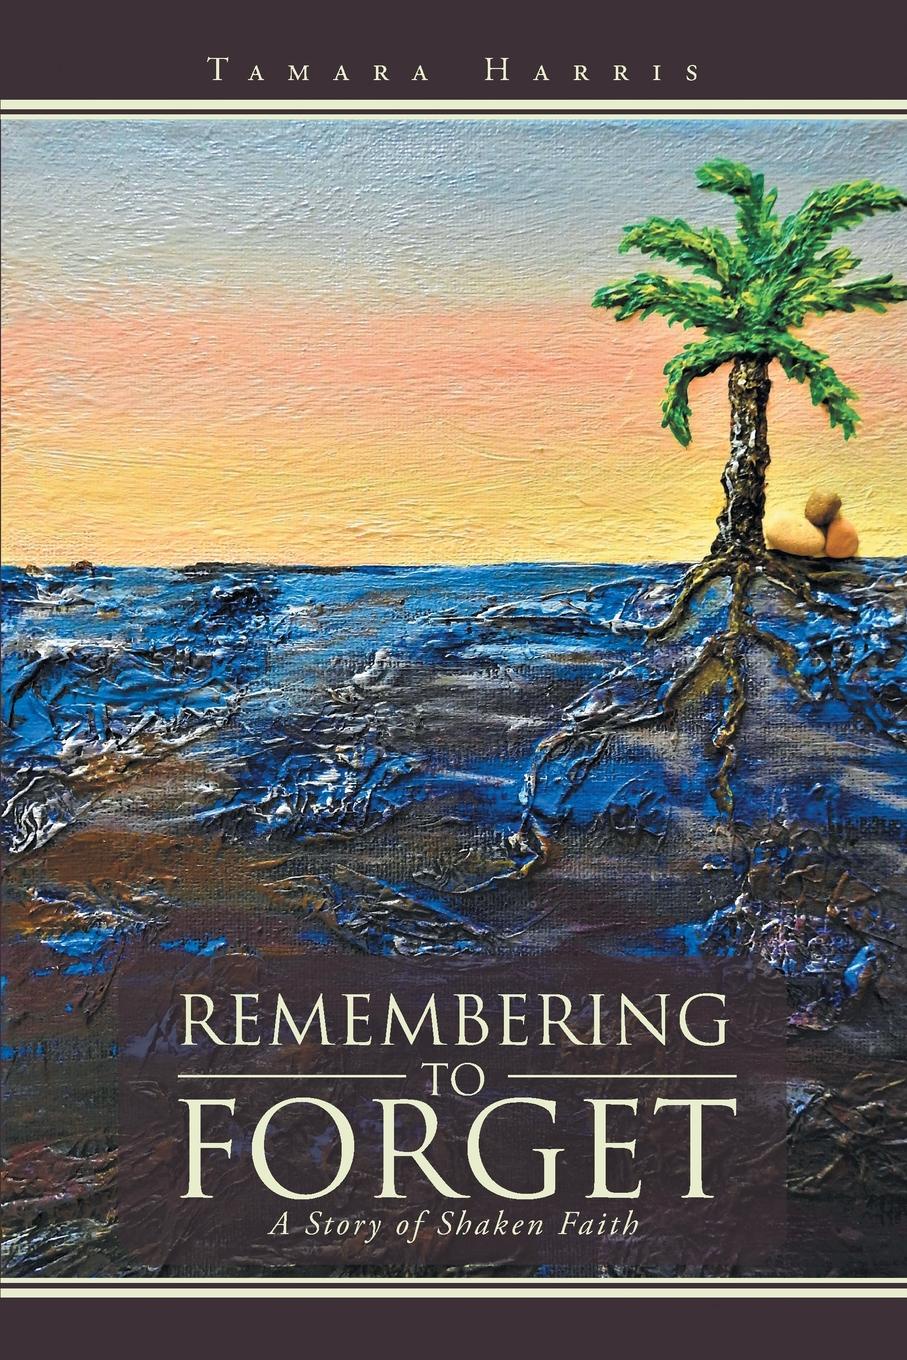 Remembering to Forget. A Story of Shaken Faith